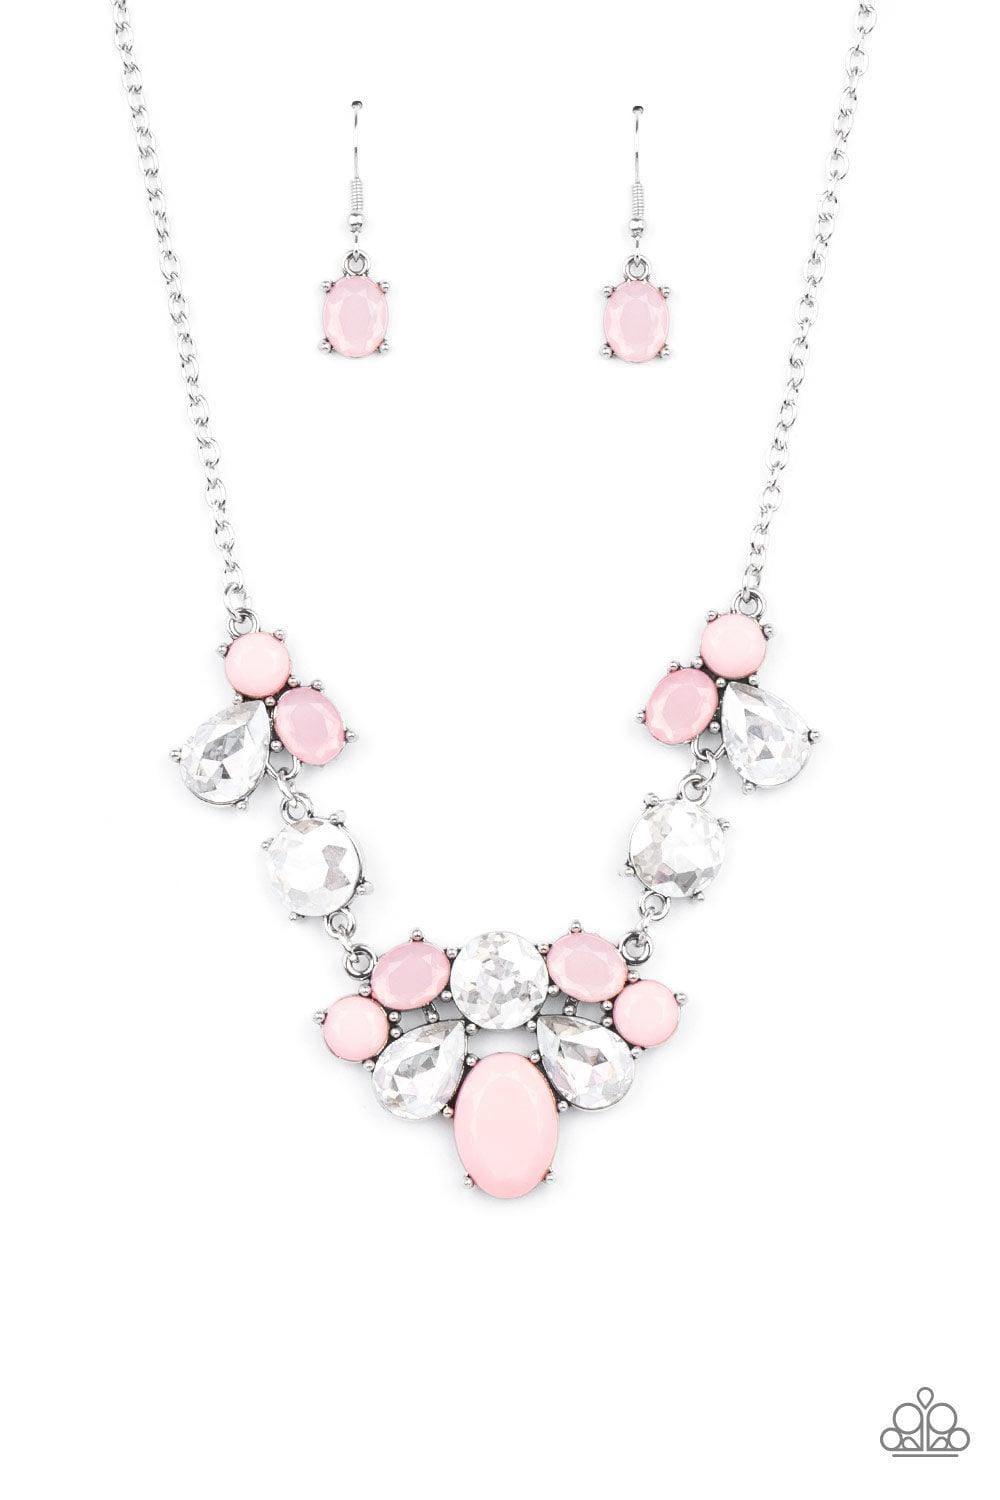 Paparazzi Accessories - Ethereal Romance - Pink Necklace - Bling by JessieK